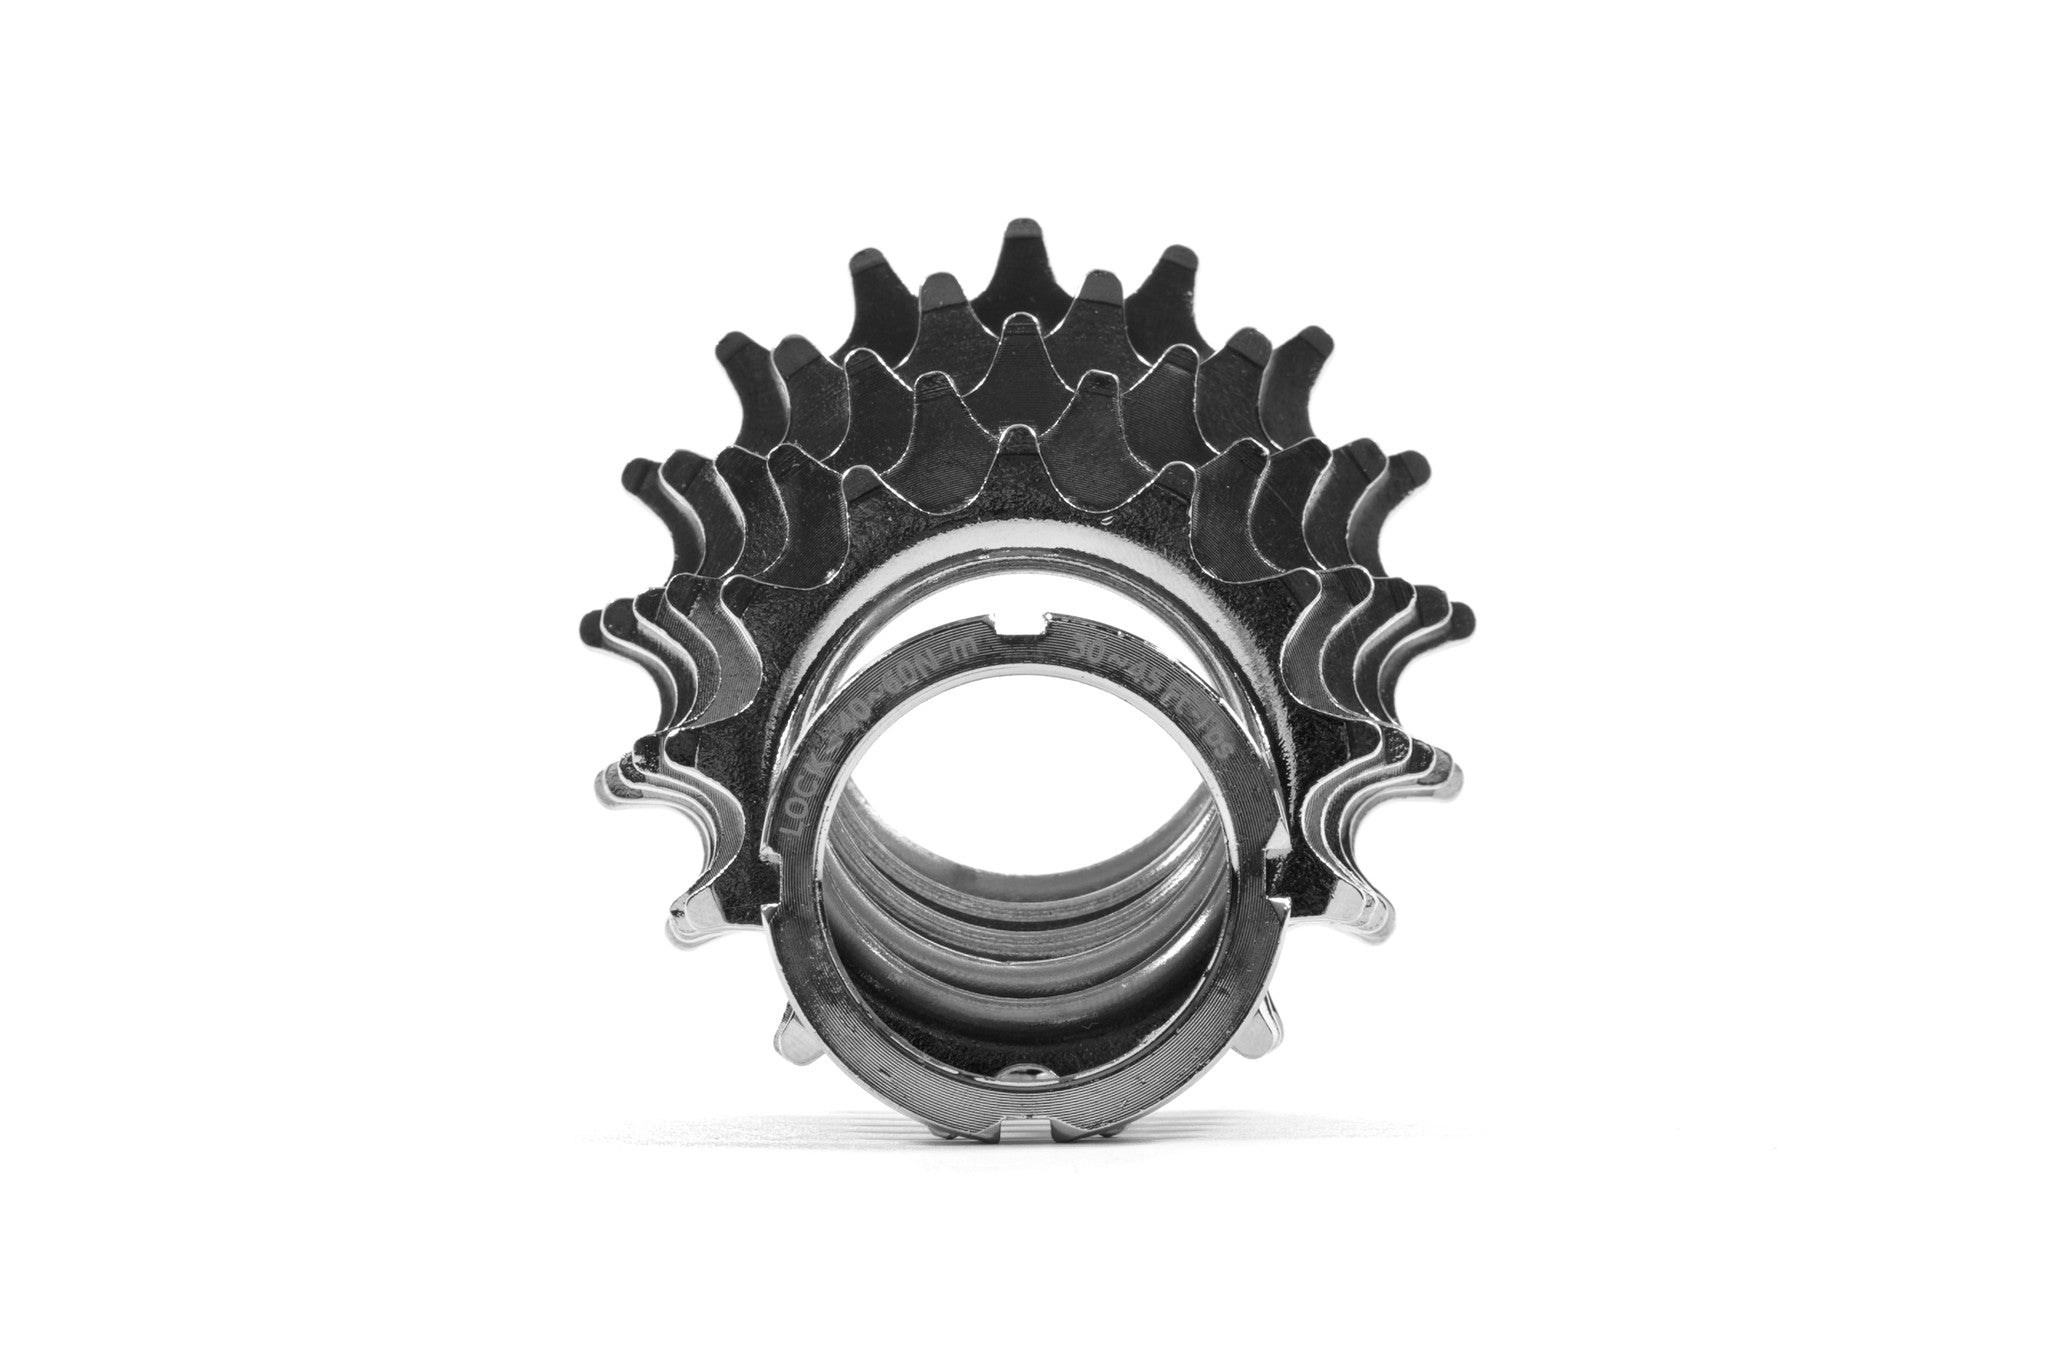 bicycle cogs